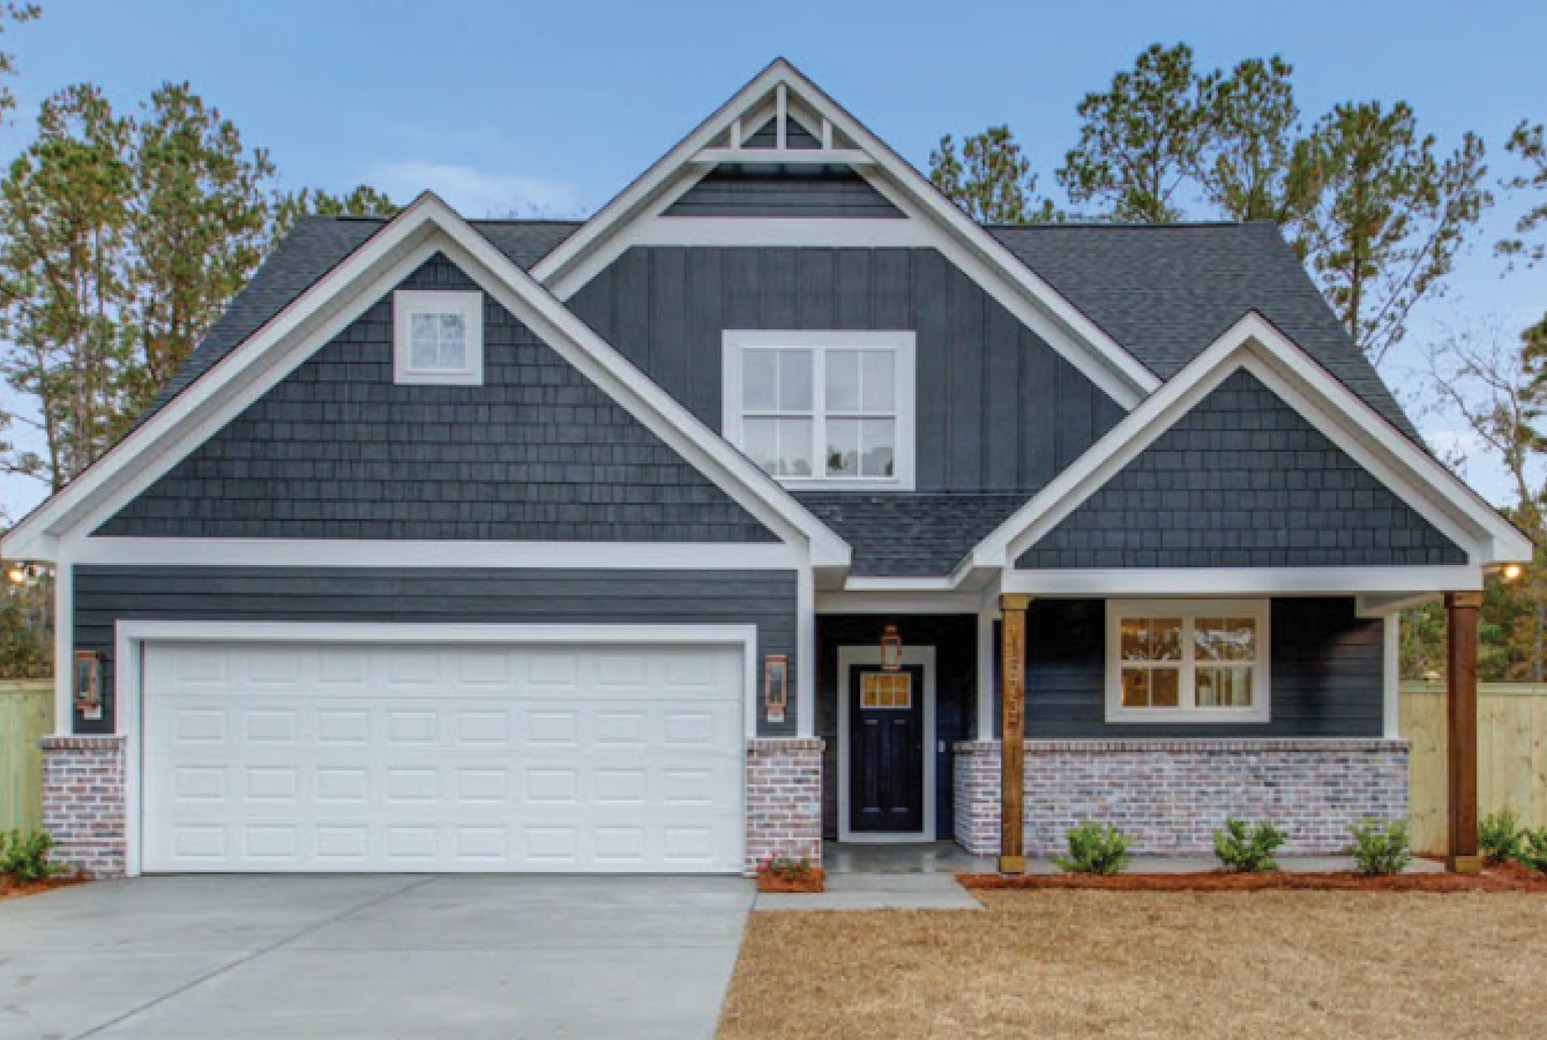 Rising Tide Homes: The Cottage - 3 BR  2.5 BA  |  2,253 SF TWO-STORY W/ 2 CAR GARAGE